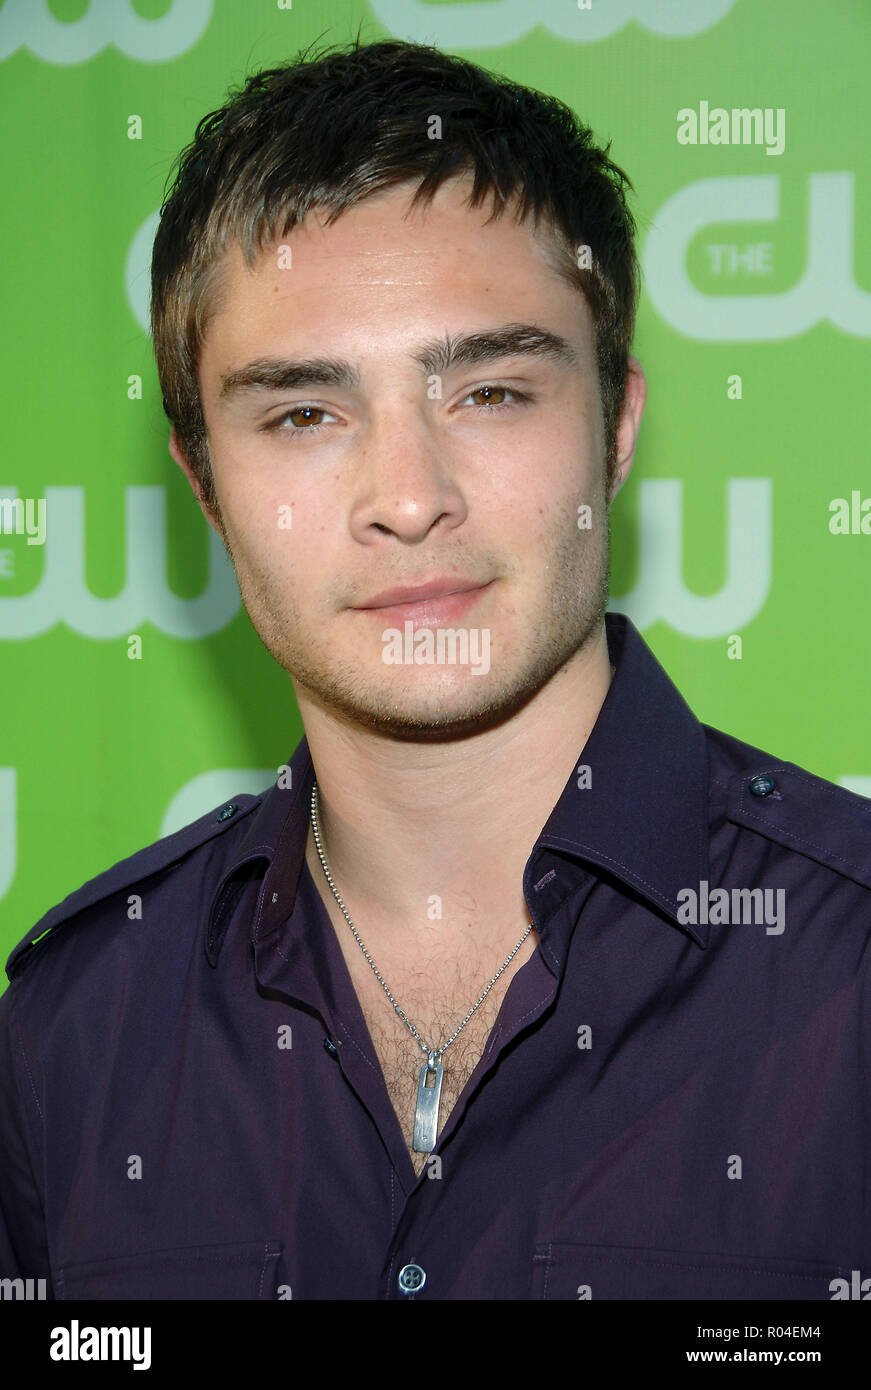 Ed Westwick ( Gossip Girl ) arriving at the tca ( television critic association ) CW Summer party on the Fountain Plazza @ The Pacific design Center in Los Angeles.  headshot eye contact WestwickEd 111 Red Carpet Event, Vertical, USA, Film Industry, Celebrities,  Photography, Bestof, Arts Culture and Entertainment, Topix Celebrities fashion /  Vertical, Best of, Event in Hollywood Life - California,  Red Carpet and backstage, USA, Film Industry, Celebrities,  movie celebrities, TV celebrities, Music celebrities, Photography, Bestof, Arts Culture and Entertainment,  Topix, headshot, vertical, o Stock Photo